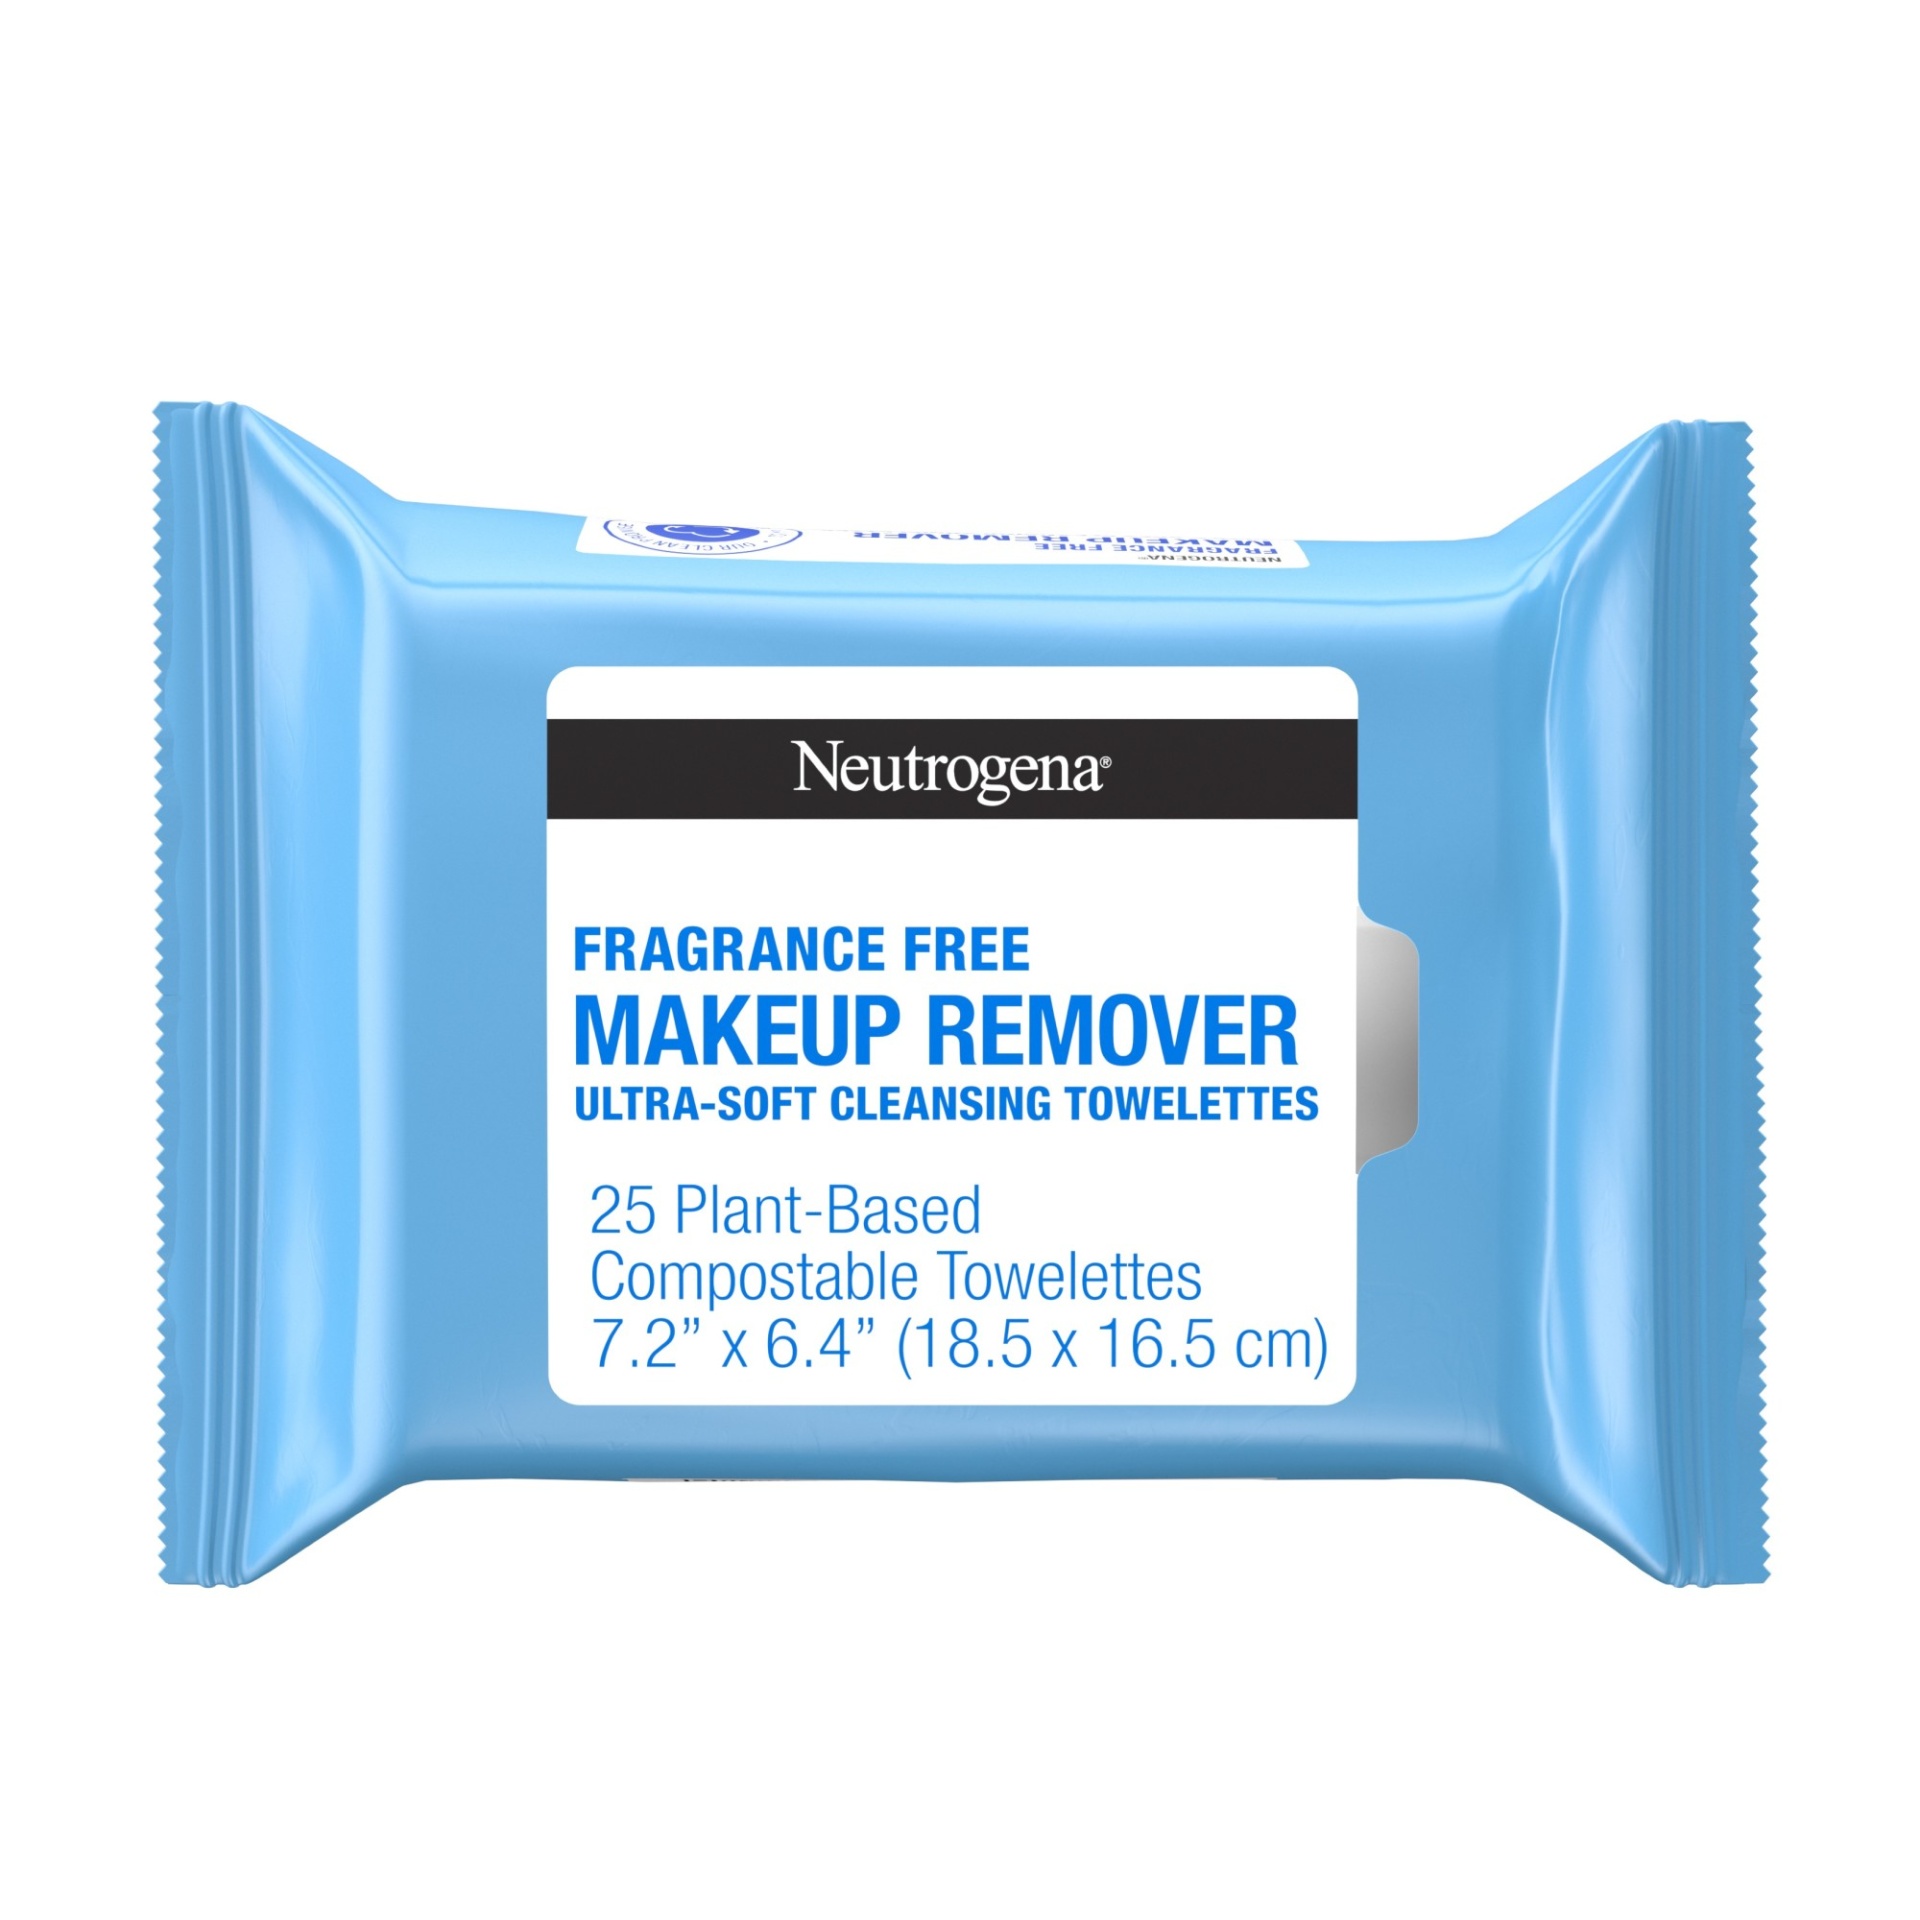 slide 1 of 7, Neutrogena Fragrance-Free Makeup Remover Face Wipes, Daily Facial Cleansing Towelettes for Waterproof Makeup, Dirt & Oil, Gentle, Alcohol- & Fragrance Free, 100% Plant-Based Fibers, 25 ct